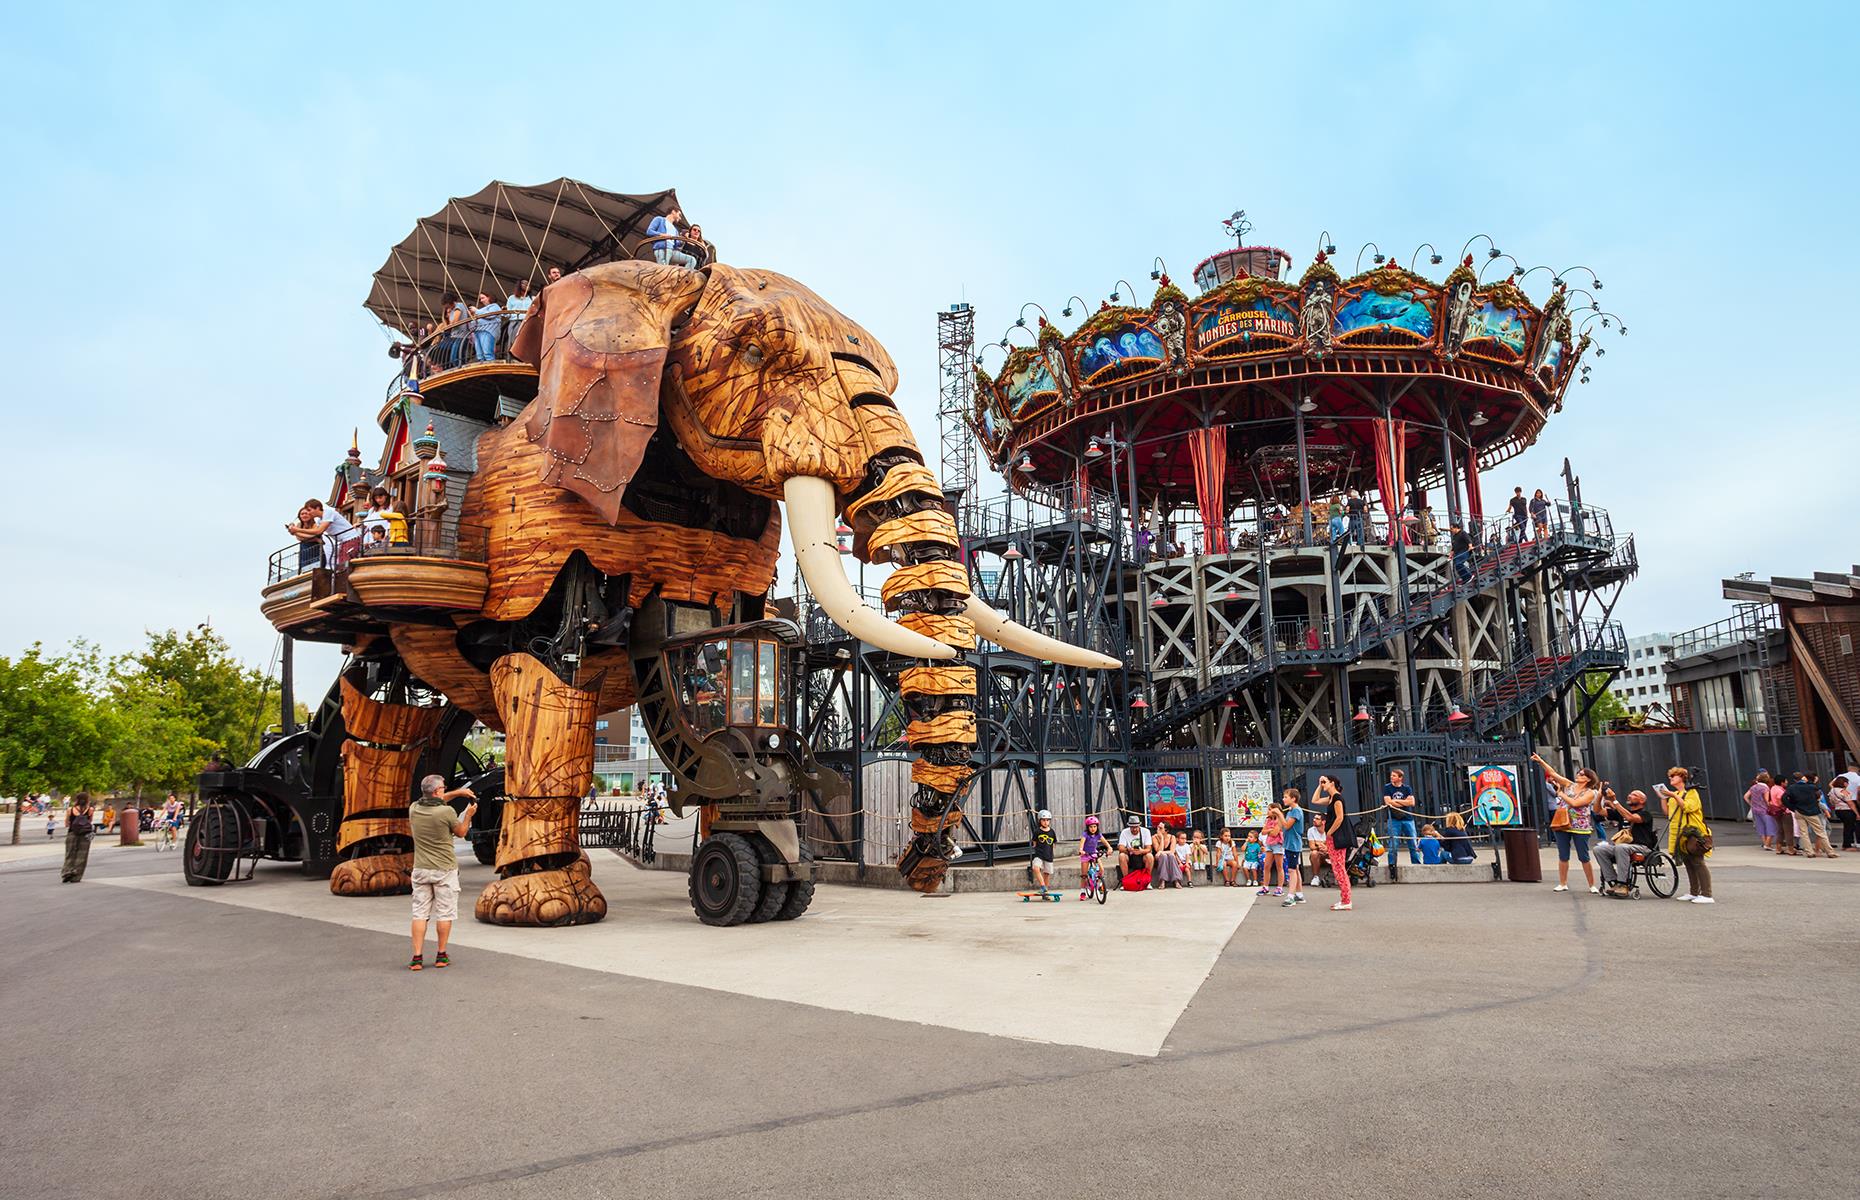 <p>It’s not every day you get to climb aboard a four-story high mechanical wooden elephant. But Nantes’ <a href="https://www.lesmachines-nantes.fr/en/discover/the-grand-elephant/">Les Machines de l’Île</a> allows you to do just that. As the elephant goes for its walk around an island on the banks of the River Loire, up to 50 people can hitch a ride on the viewing carriage on the elephant’s back and children love watching its levers work, moving the elephant's limbs and head as it 'walks'. Also at Les Machines De l'Île are carousels, a flight simulator and more ride-on machines.</p>